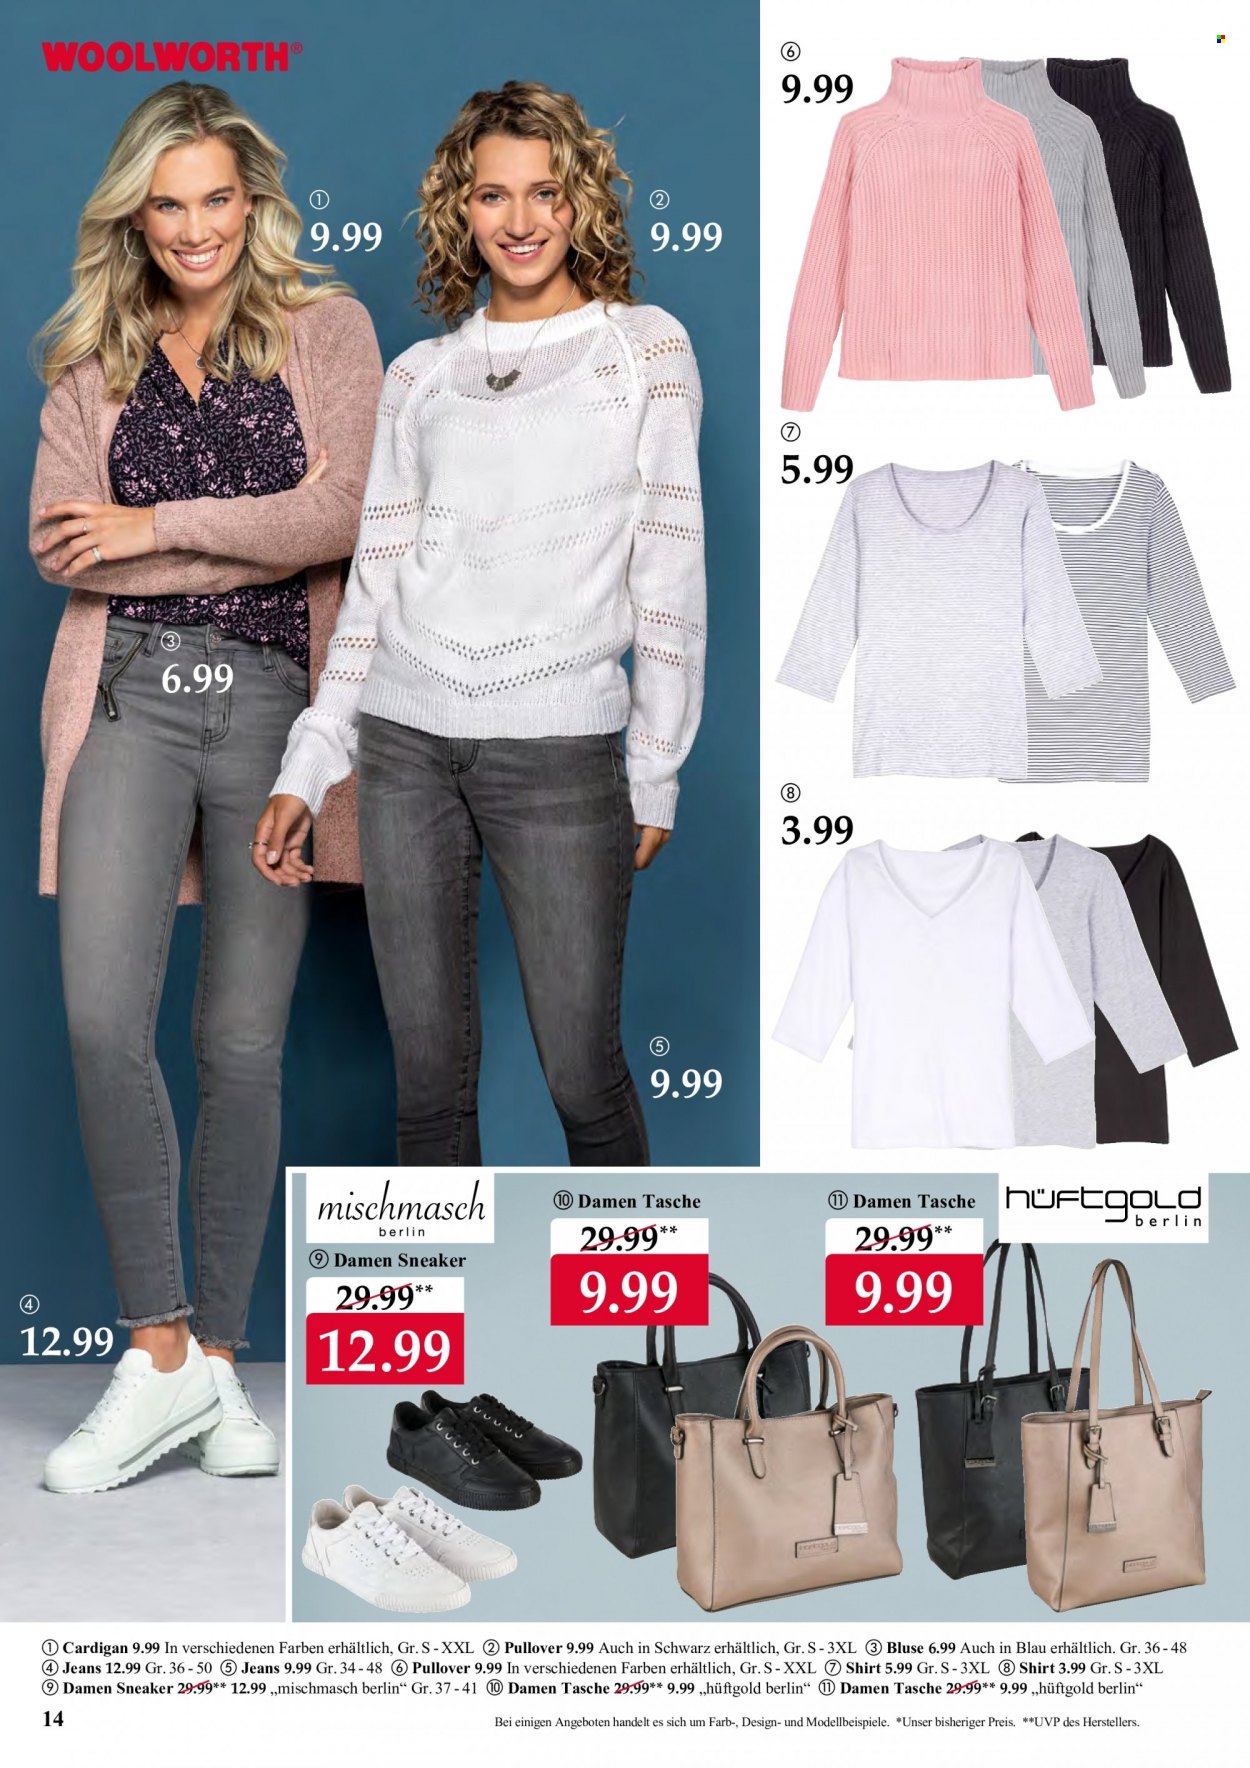 thumbnail - Prospekte Woolworth - 27.11.2021 - 4.12.2021 - Produkte in Aktion - Sneakers, Jeans, Shirt, Bluse, Cardigan, Pullover, Tasche. Seite 14.